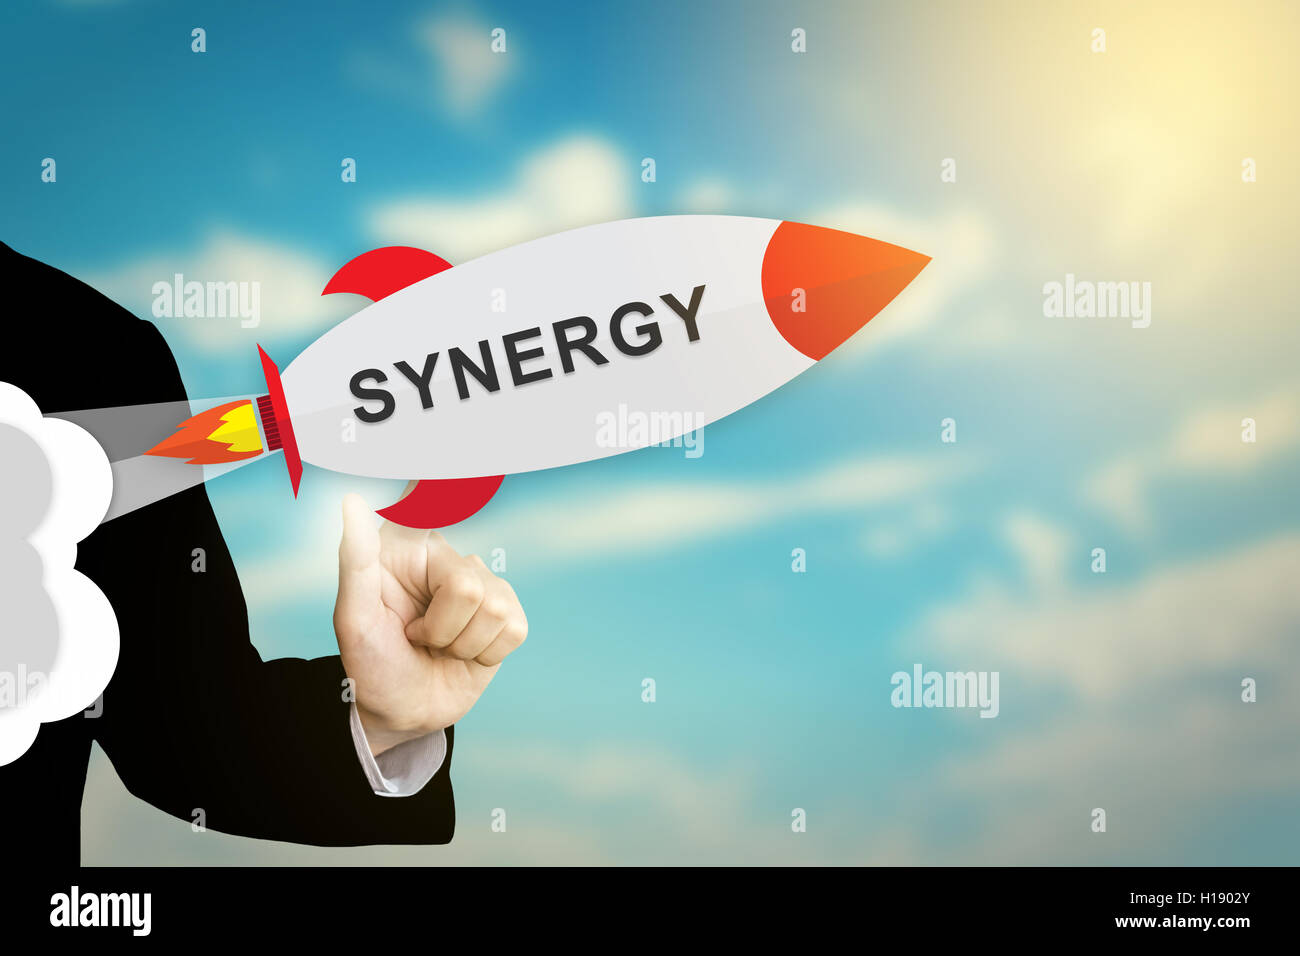 business hand clicking synergy flat design rocket Stock Photo